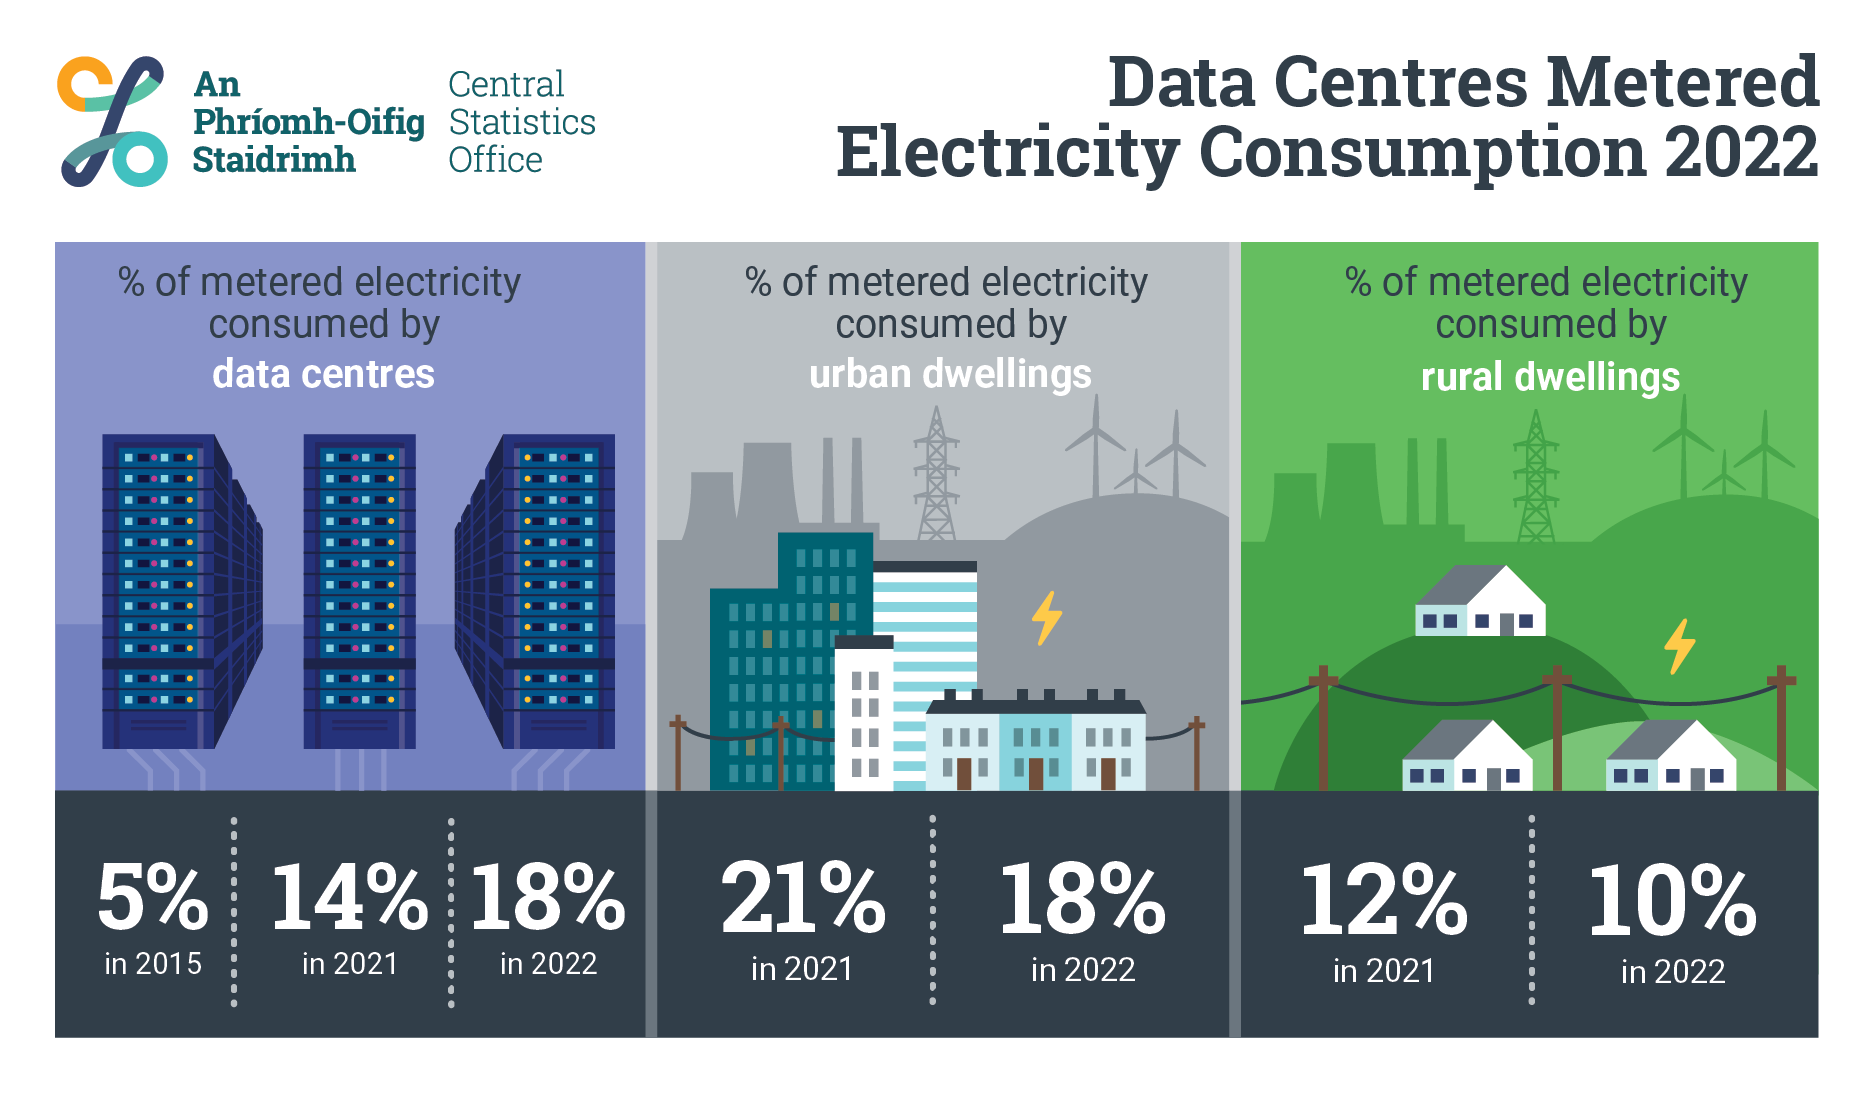 Infographic from the Central Statistics Office showing projected electricity consumption by data centers in 2022, compared to urban and rural dwellings. The bar graphs, color-coded for each dwelling type, display the percentage of metered electricity consumed in 2015, 2021, and 2022.